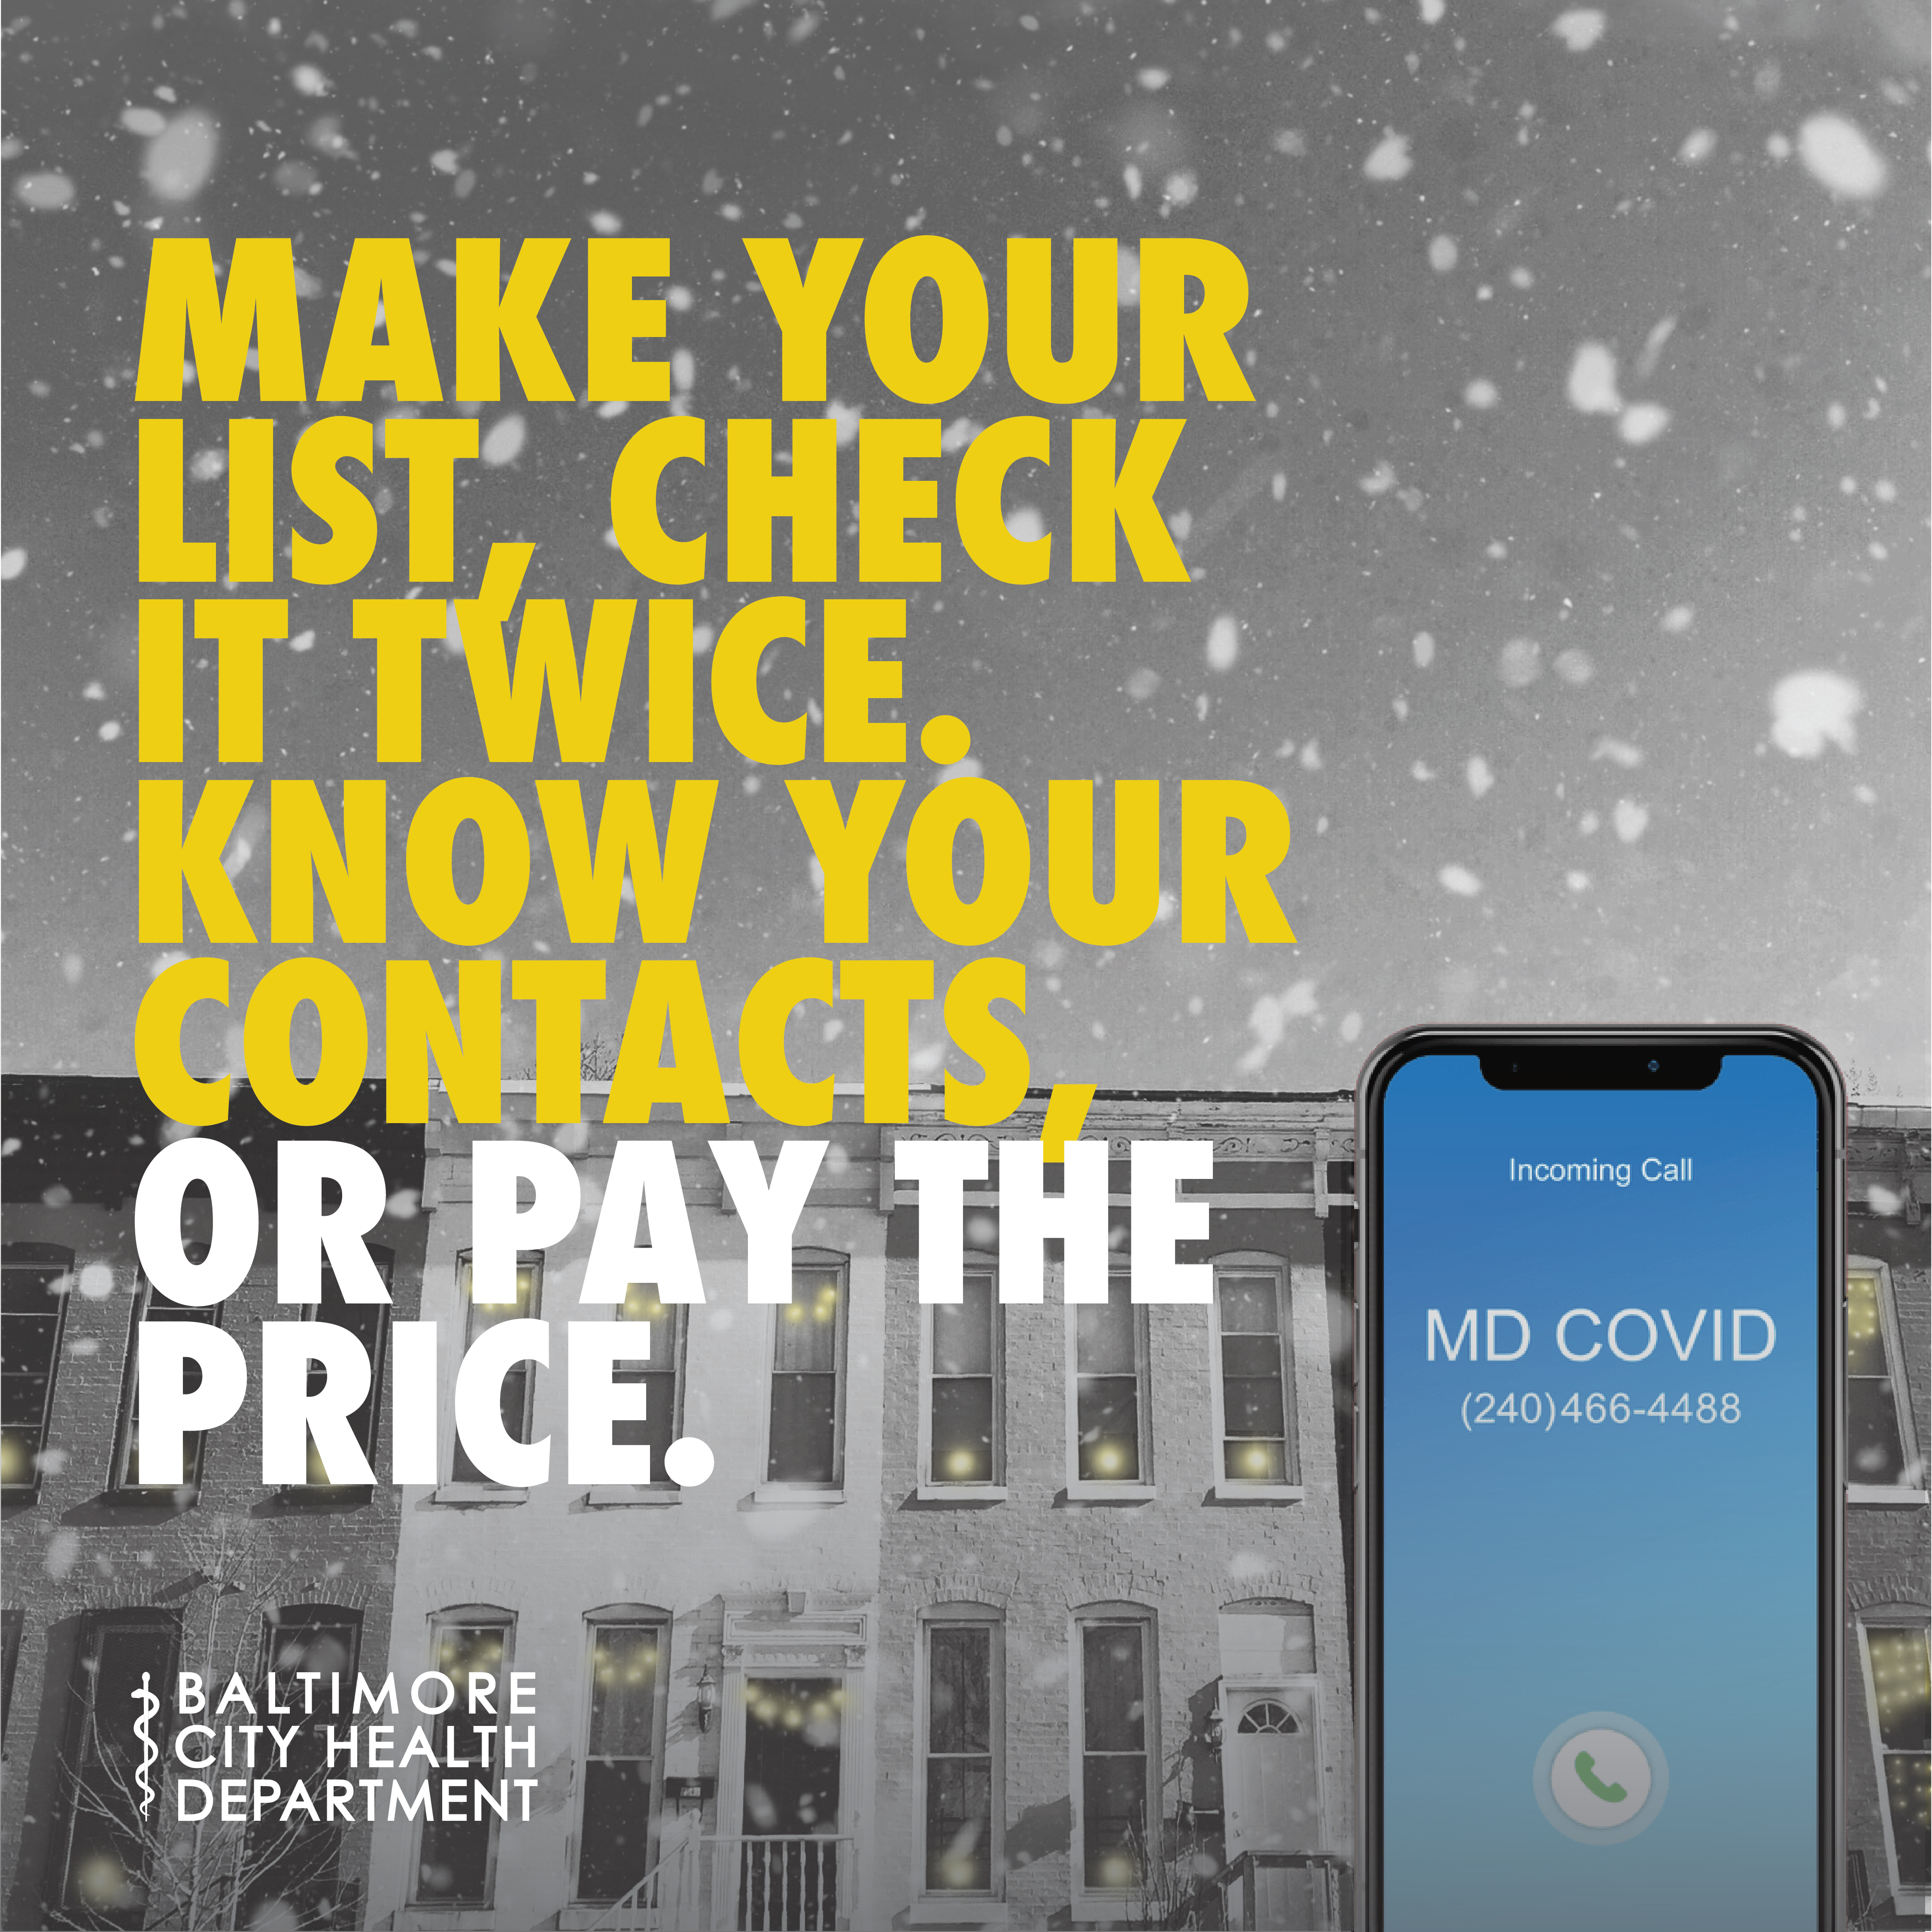 A Black and white photo of rowhomes with snow falling. In front , a cell phone with MD COVID calling. Text reads: Make your list, check it twice. Know your contacts, or pay the price. Baltimore City Health Department.